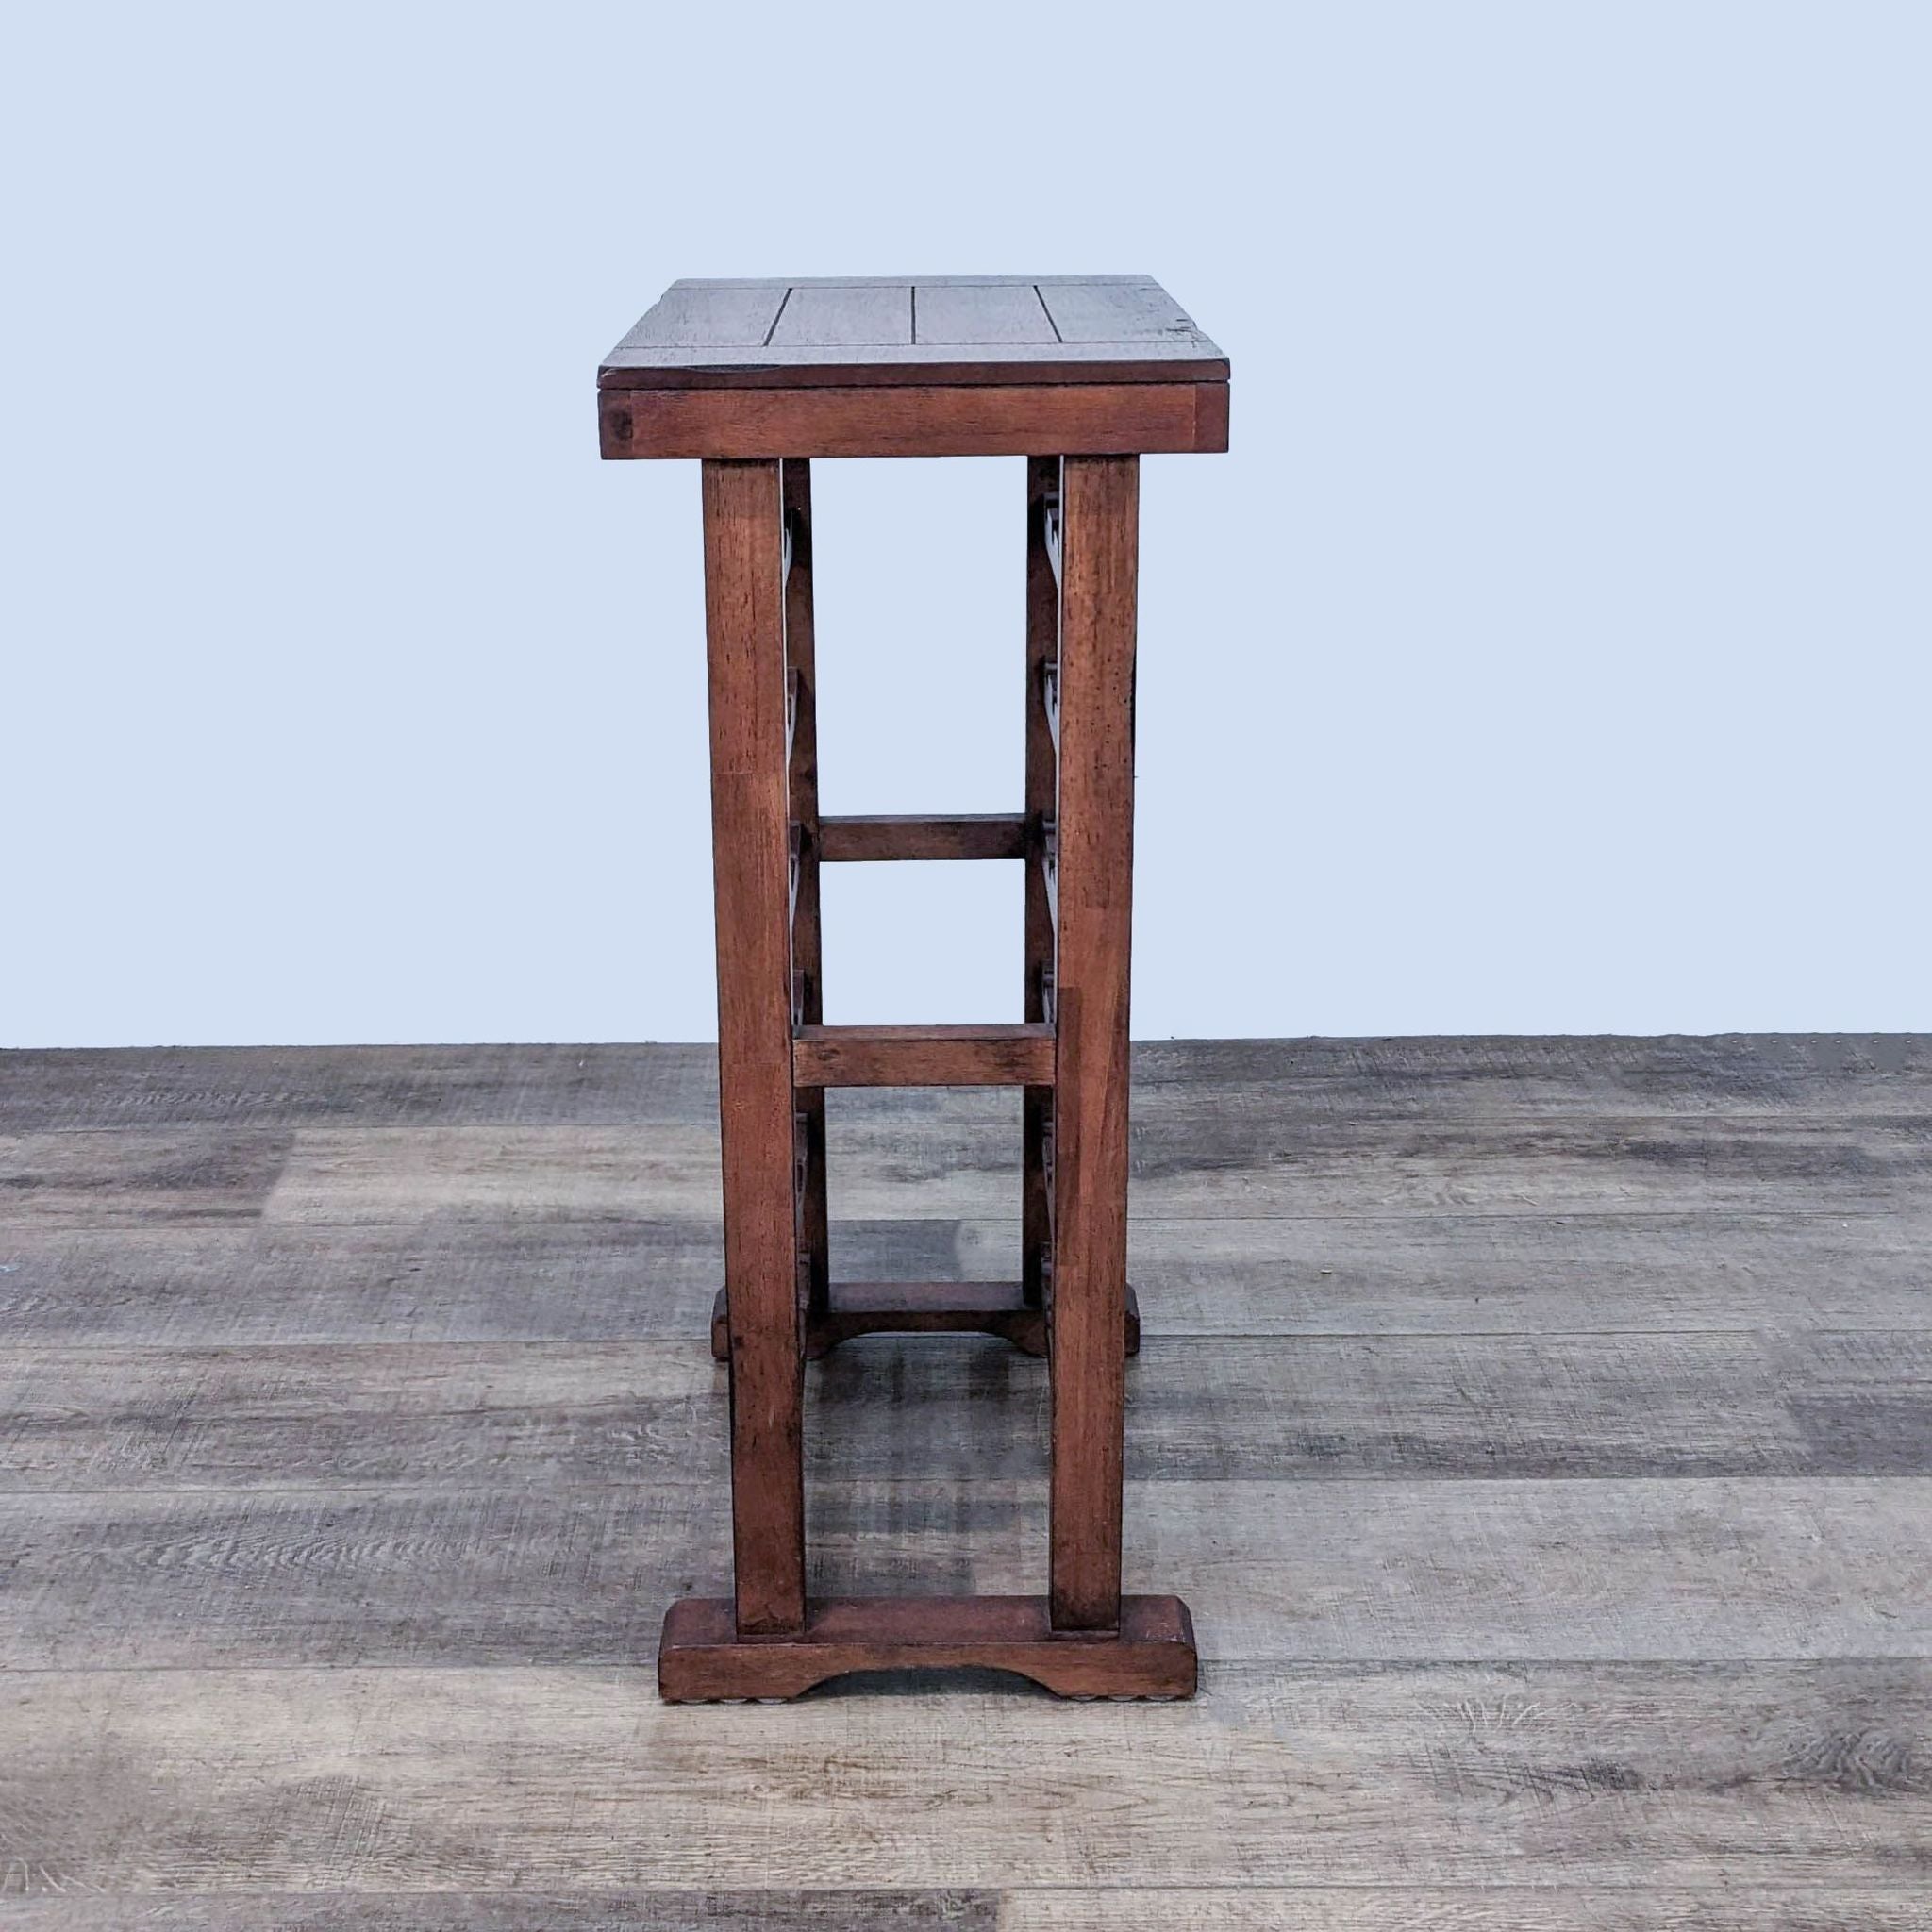 Side view of Reperch wooden wine rack, sturdy frame with footrest, on gray floor.